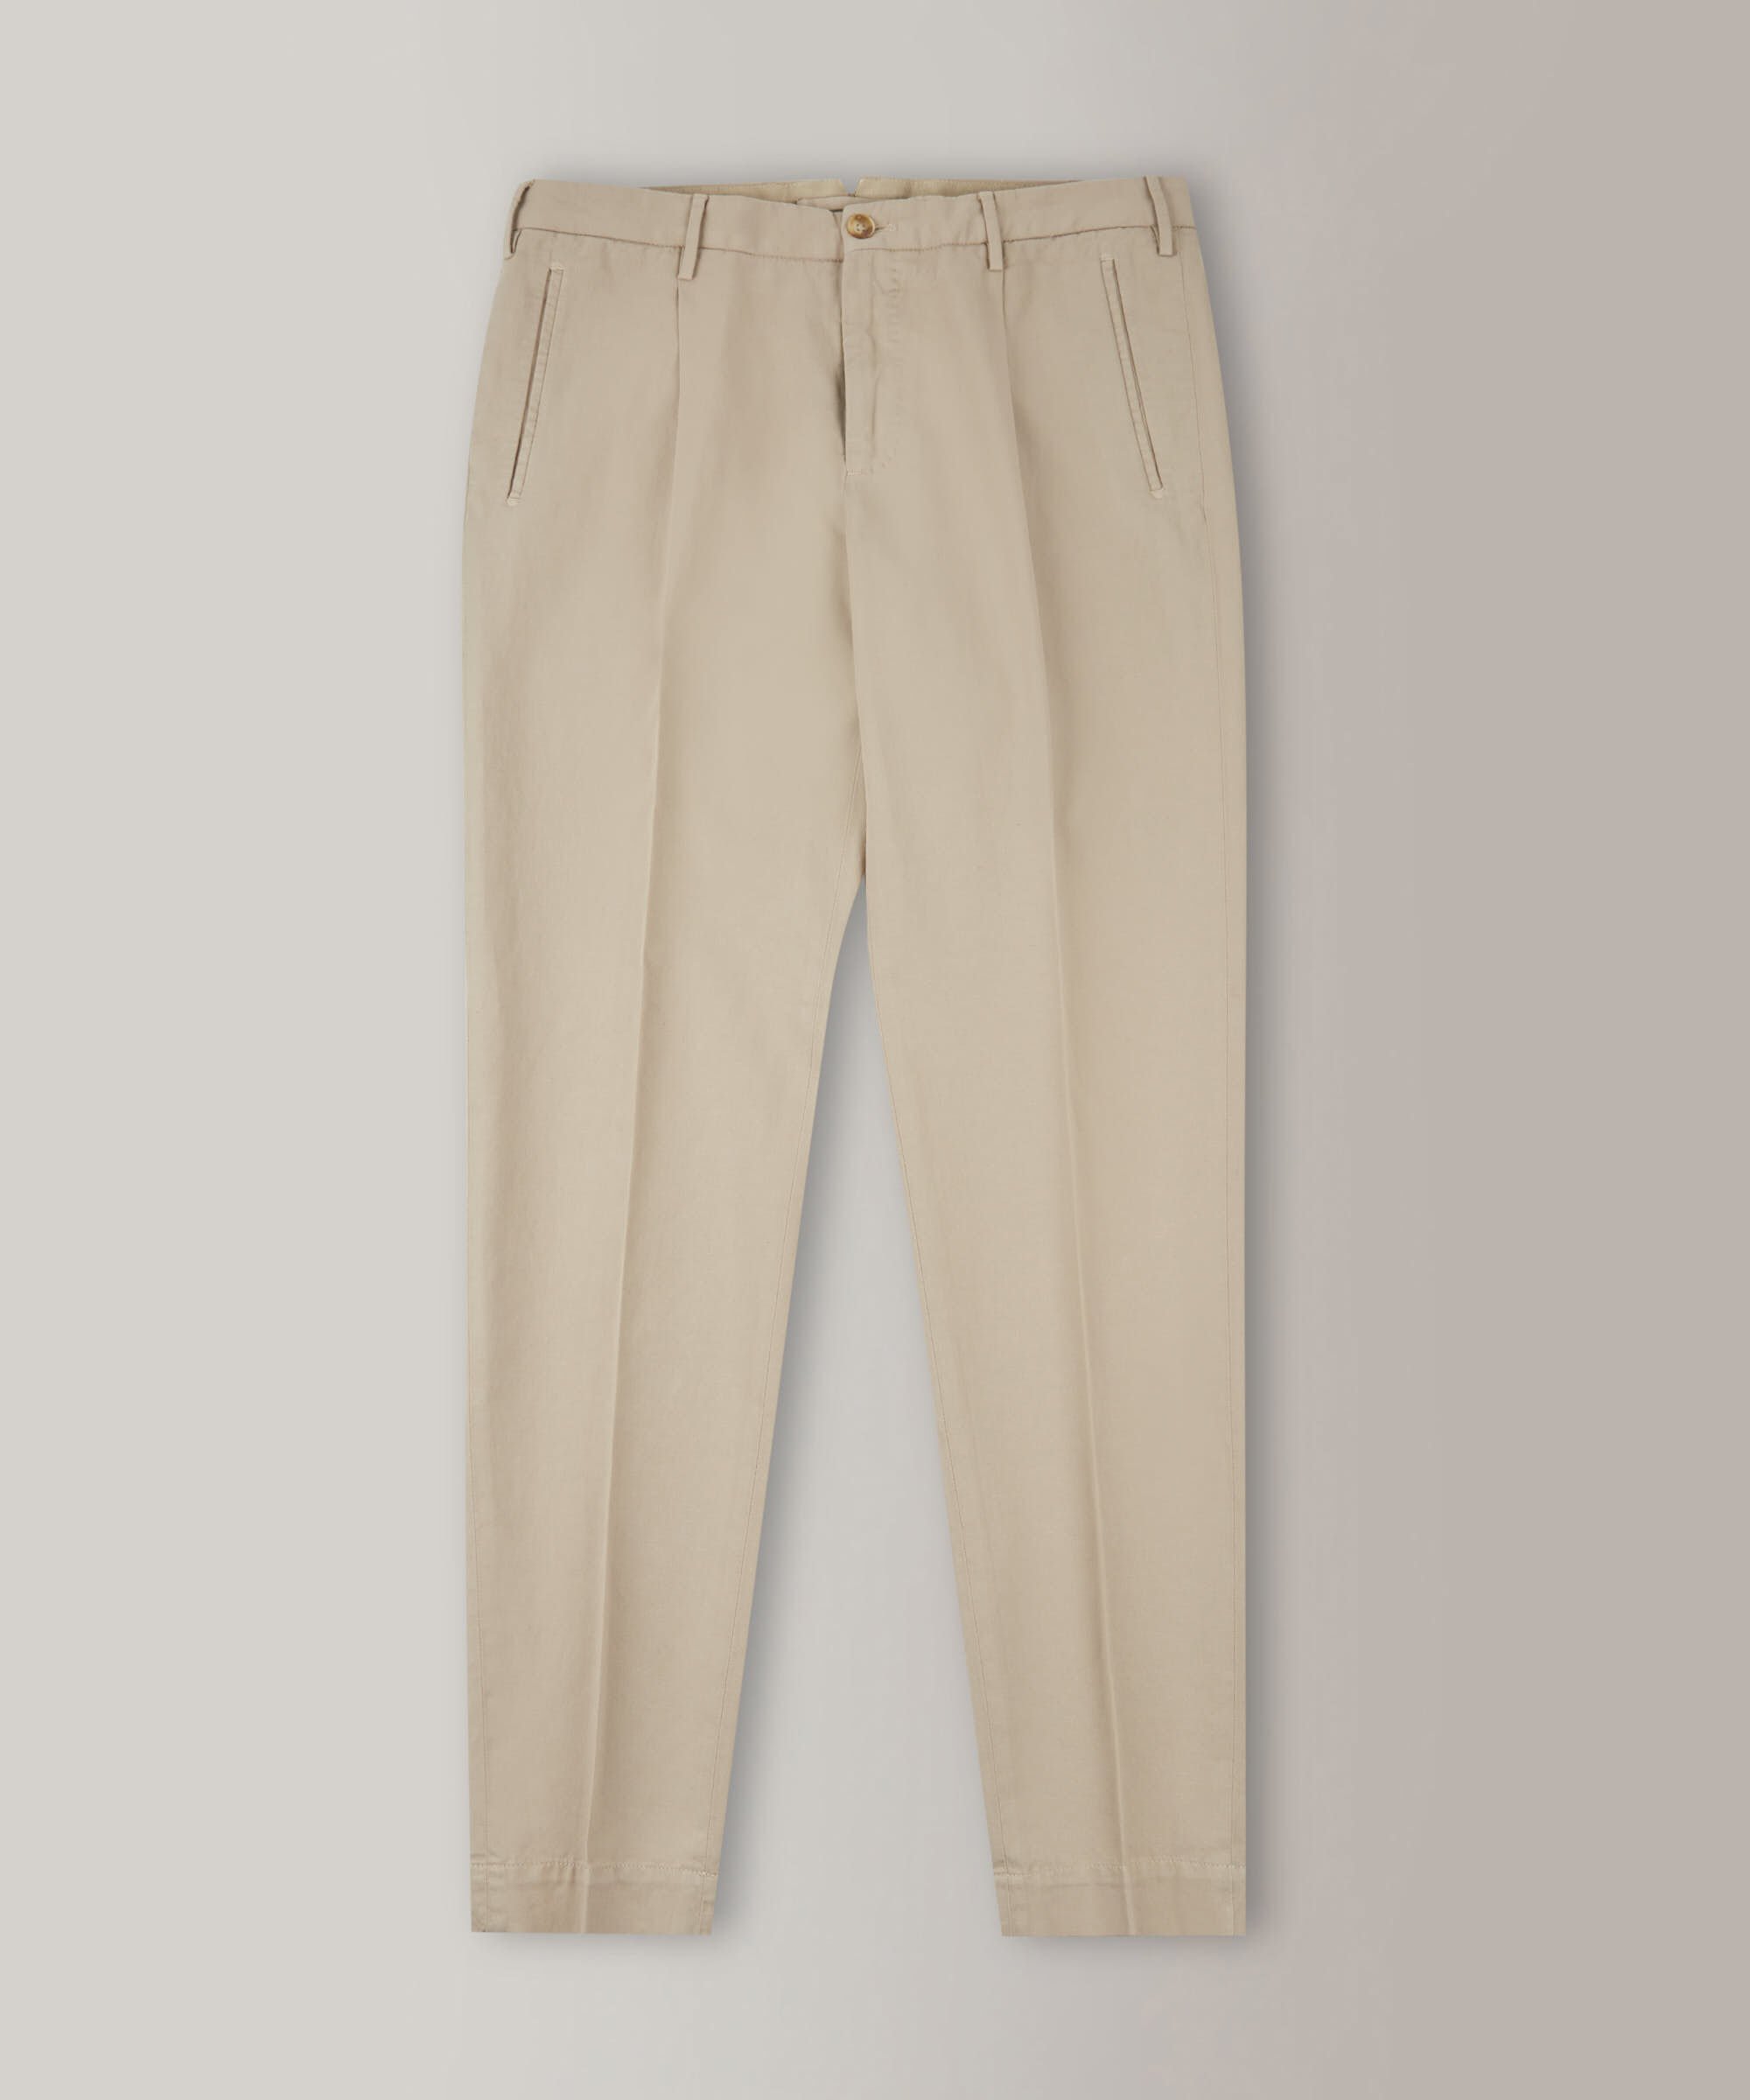 Buy Reiss Stone Erin Cotton Tapered Trousers from the Next UK online shop